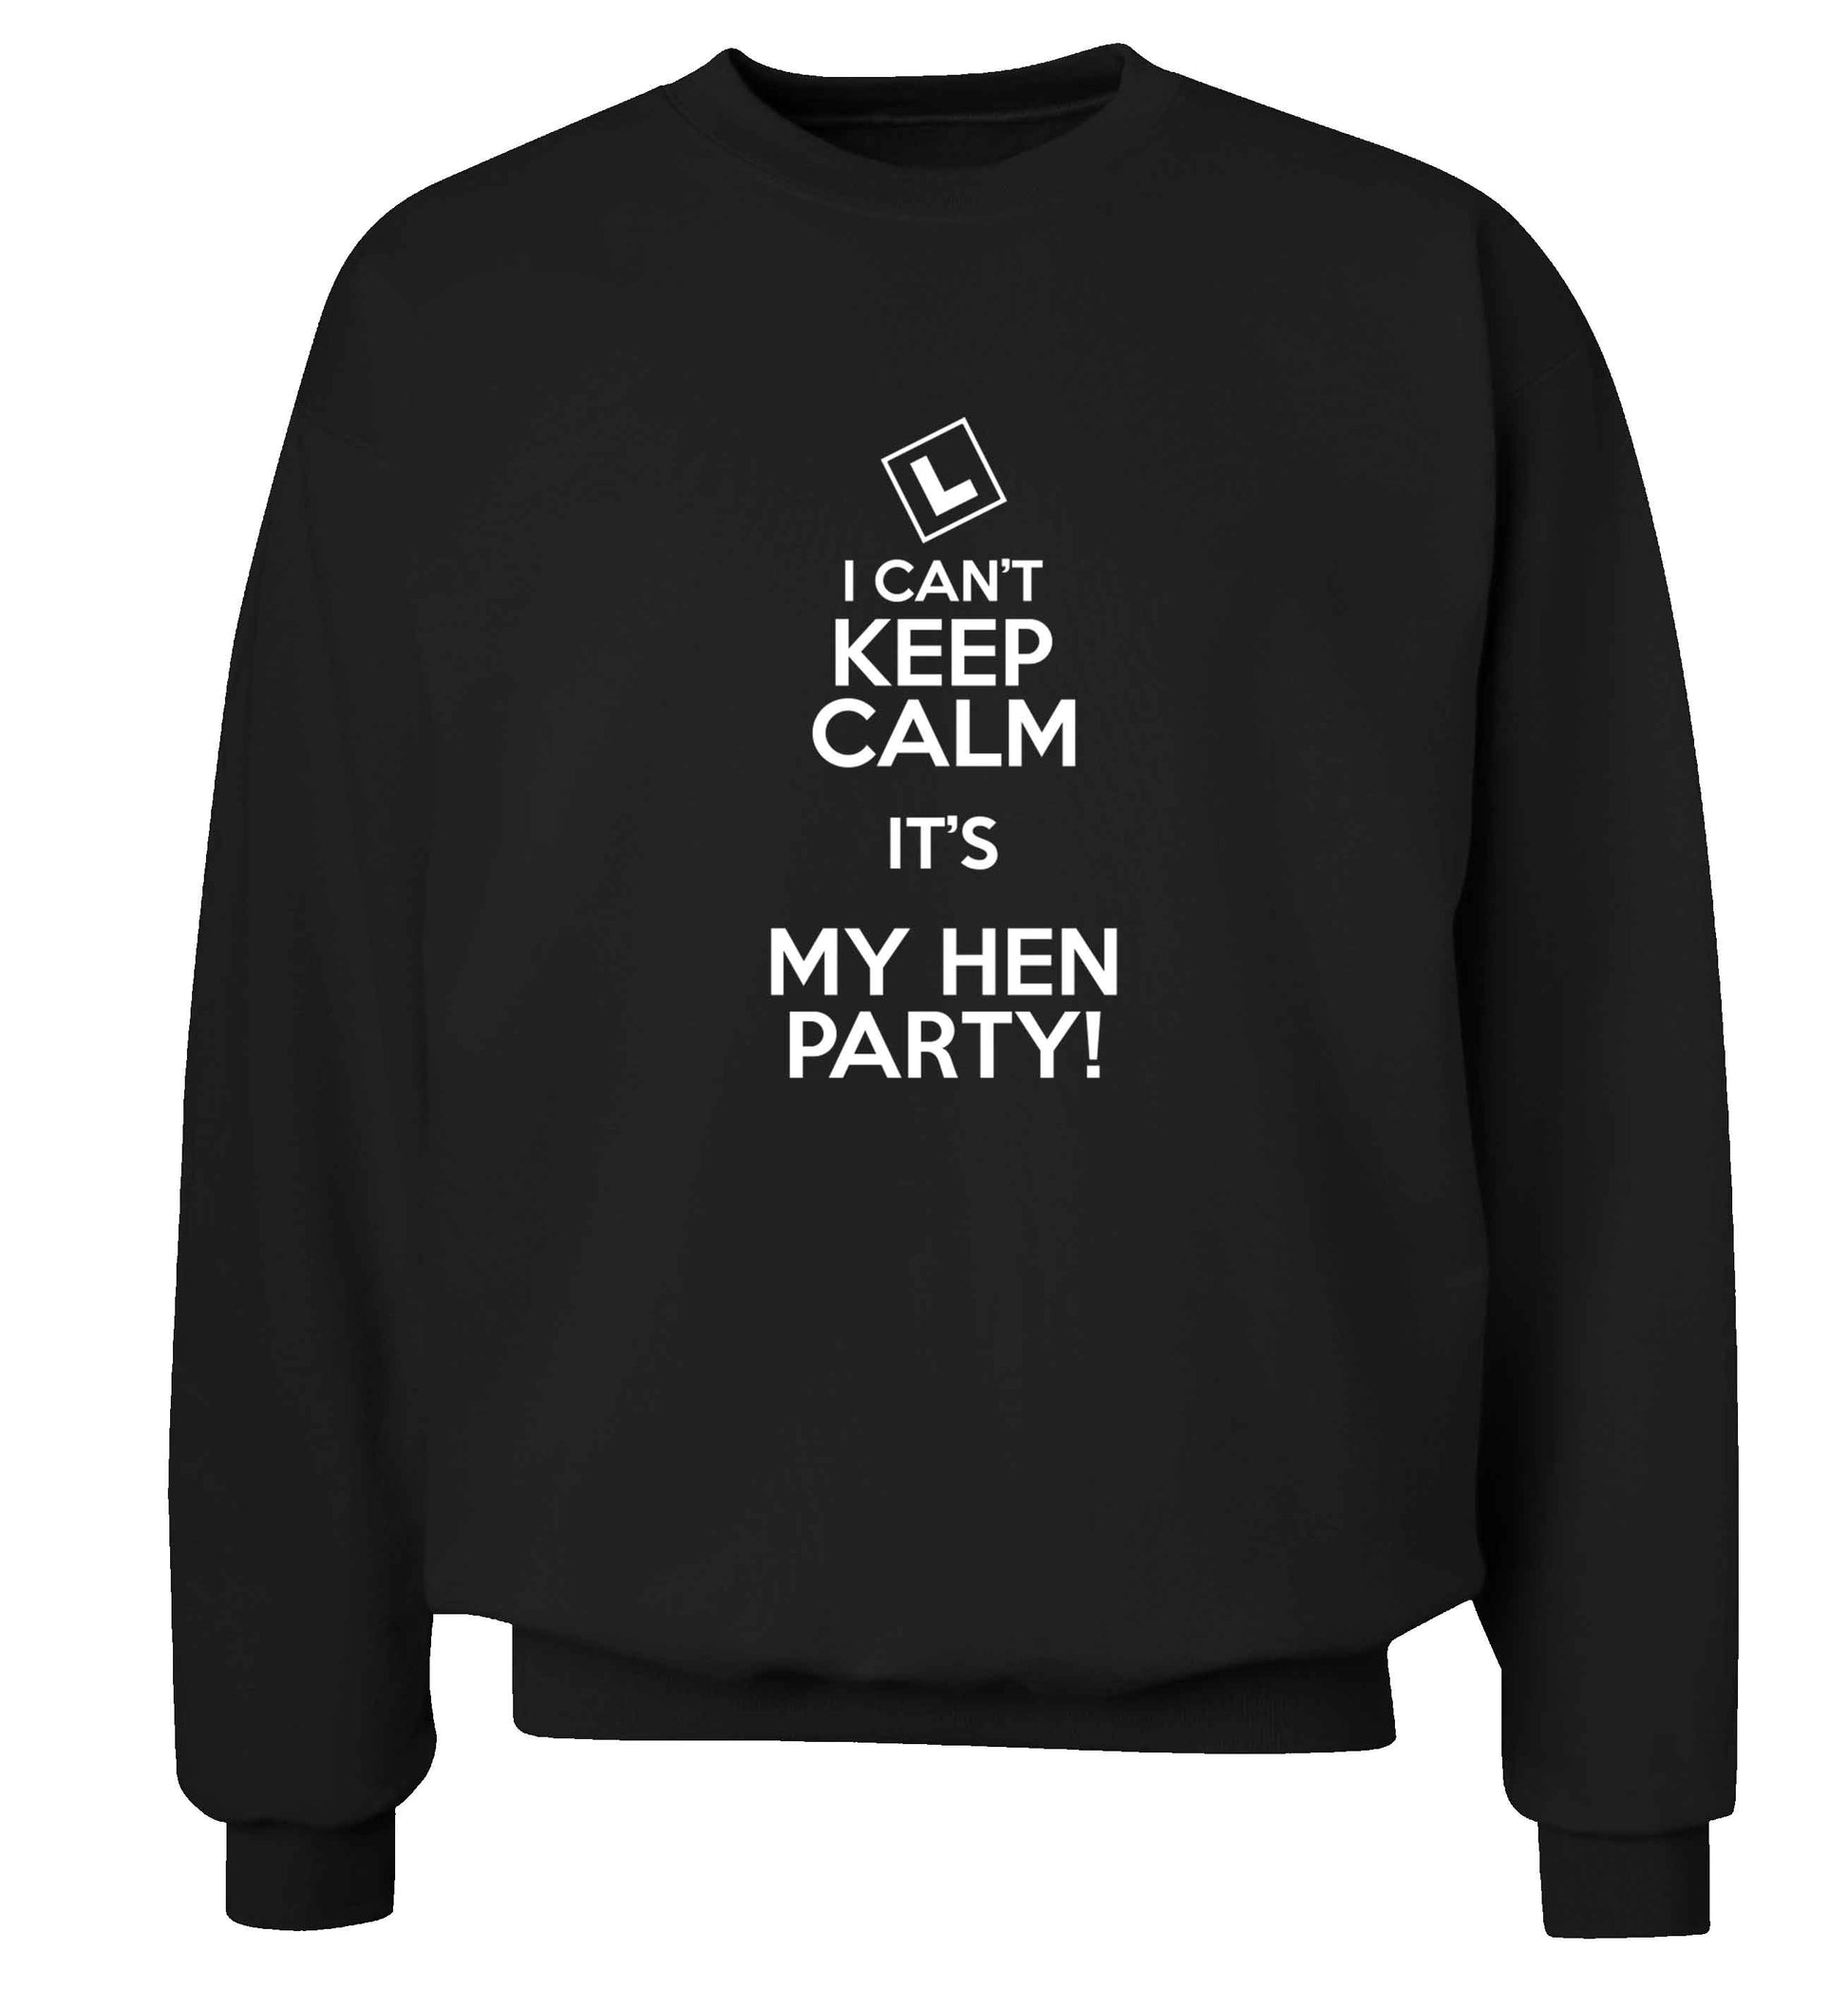 I can't keep calm it's my hen party adult's unisex black sweater 2XL